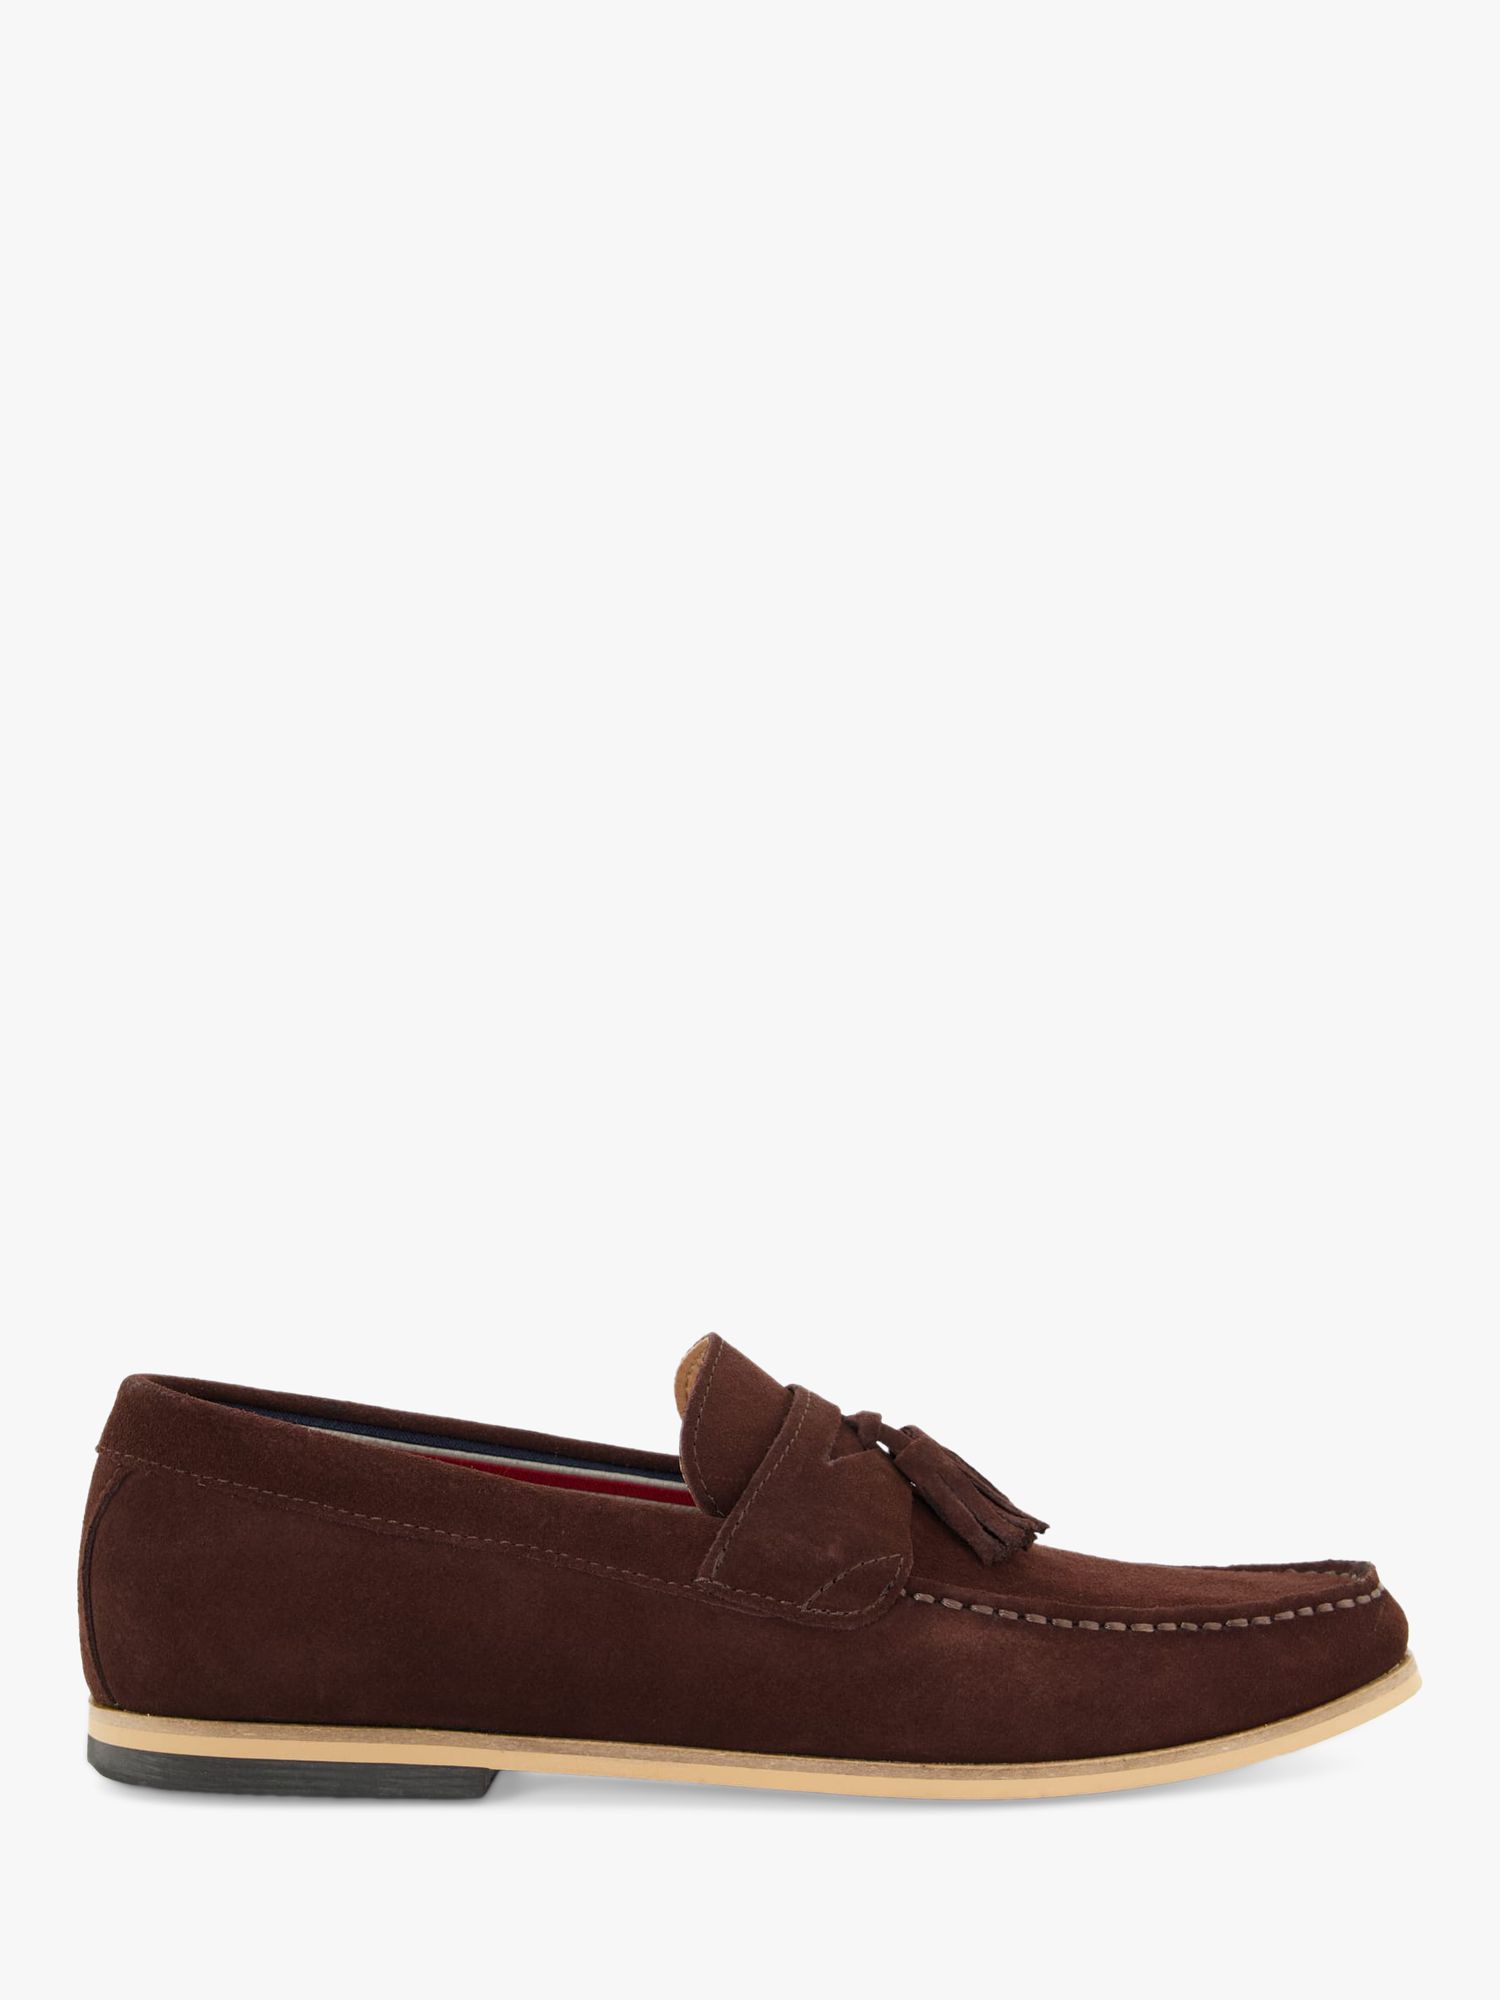 Dune Beato Suede Loafers, Brown